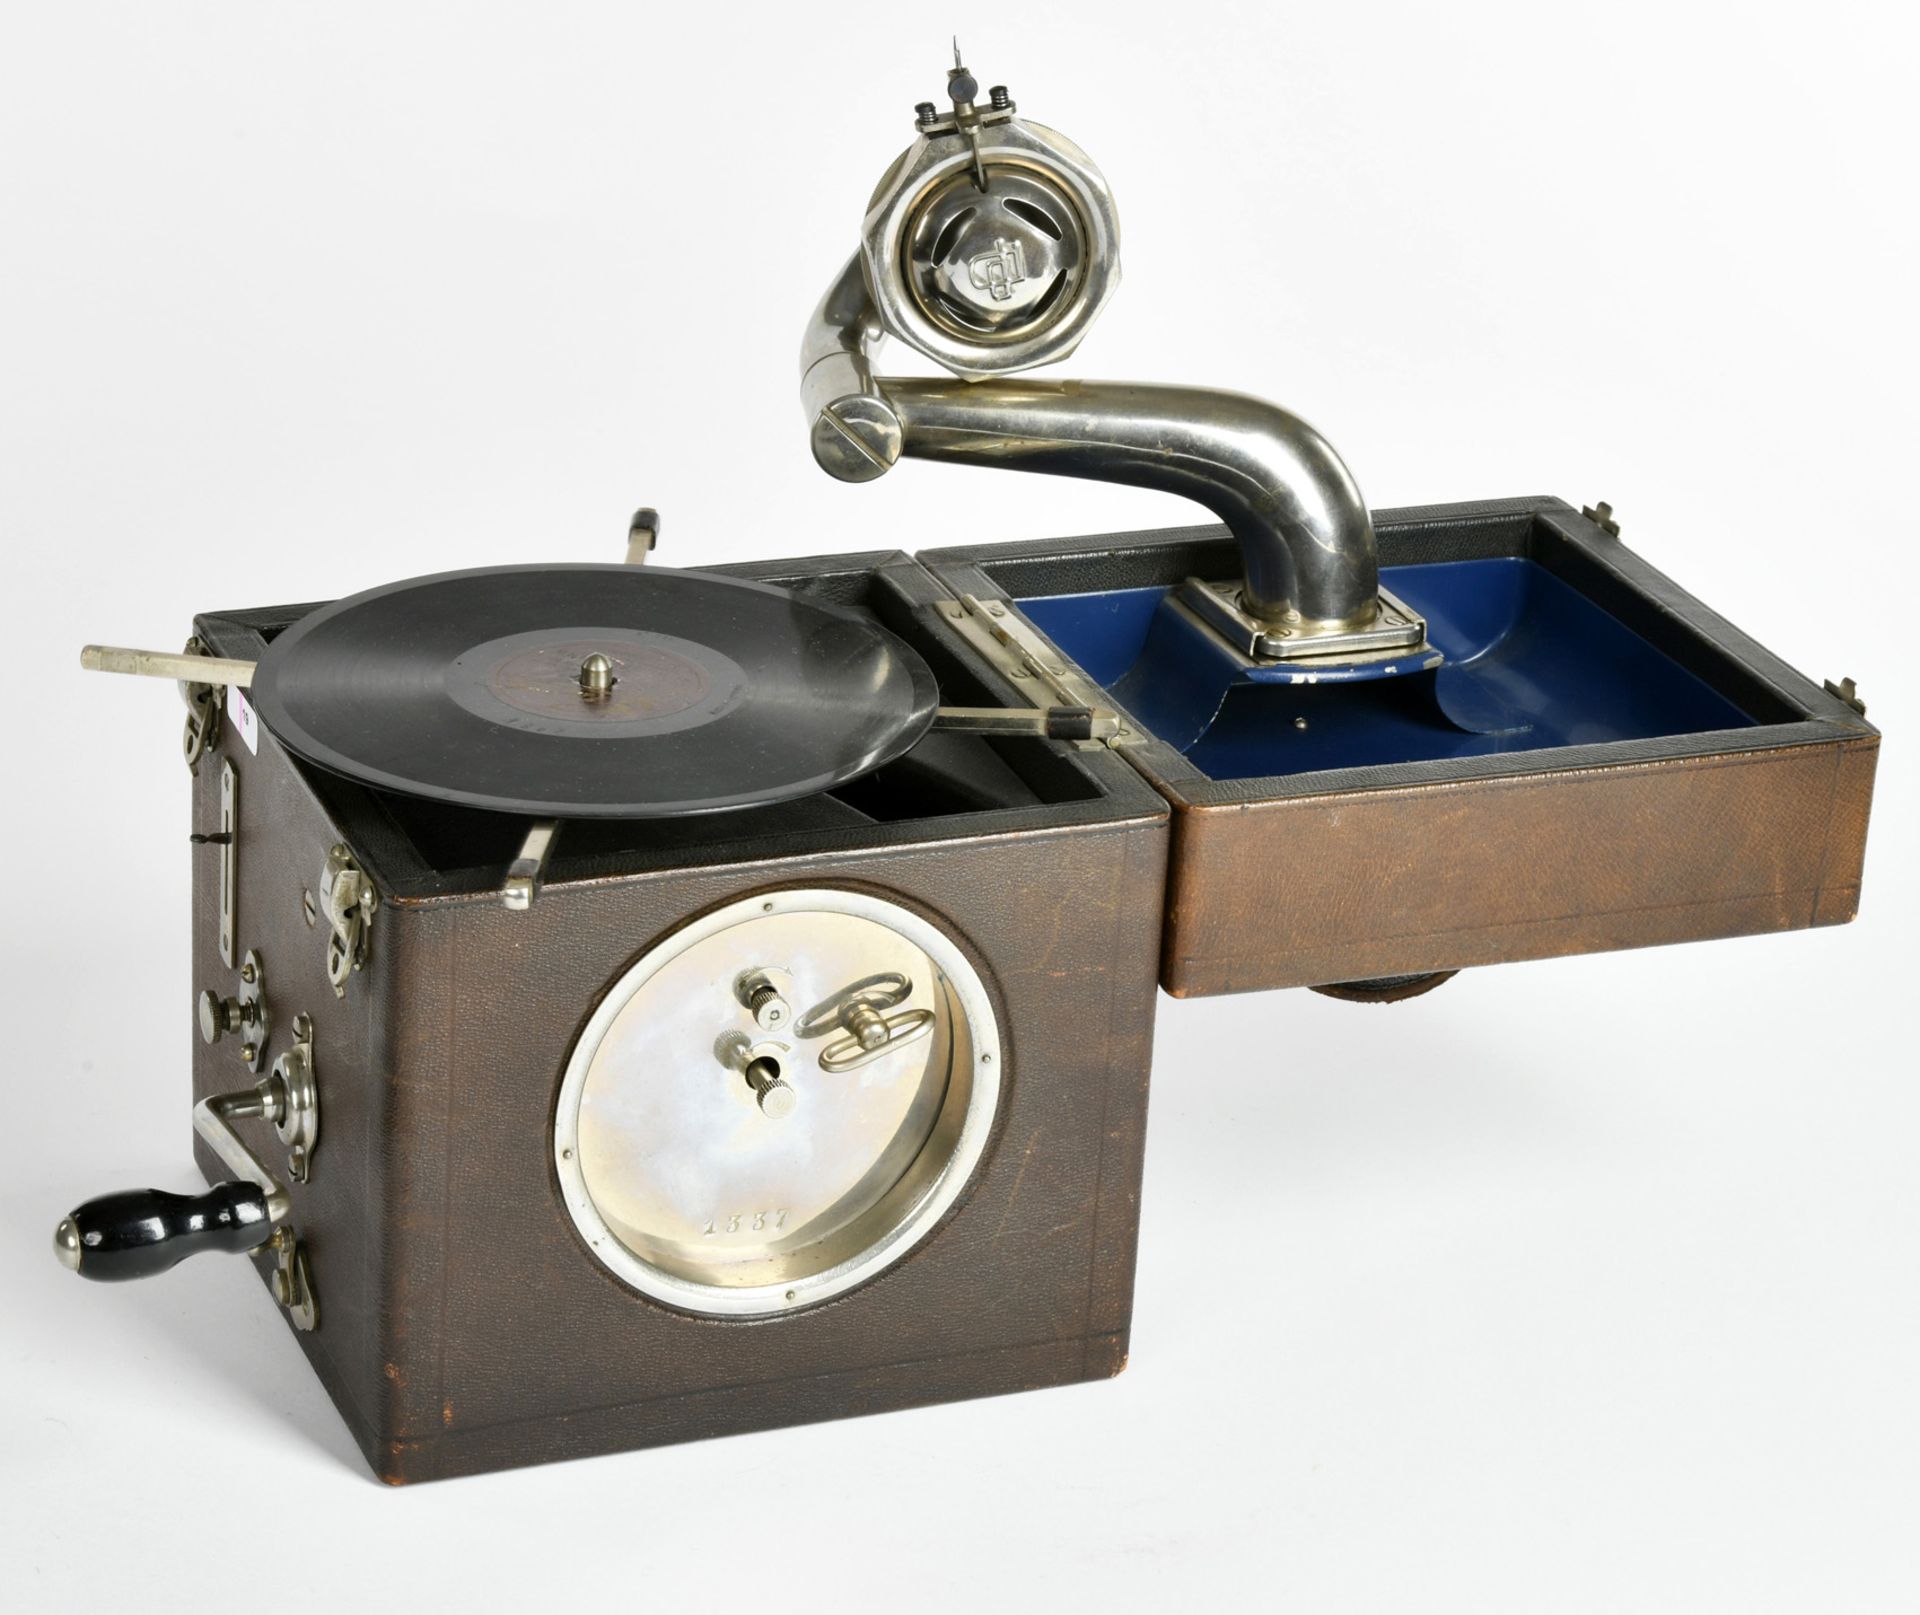 Gramophone, "Peter Pan" with clock (wake-up function) before 1930, France, 16x17x14cm, drive ok, - Image 6 of 6